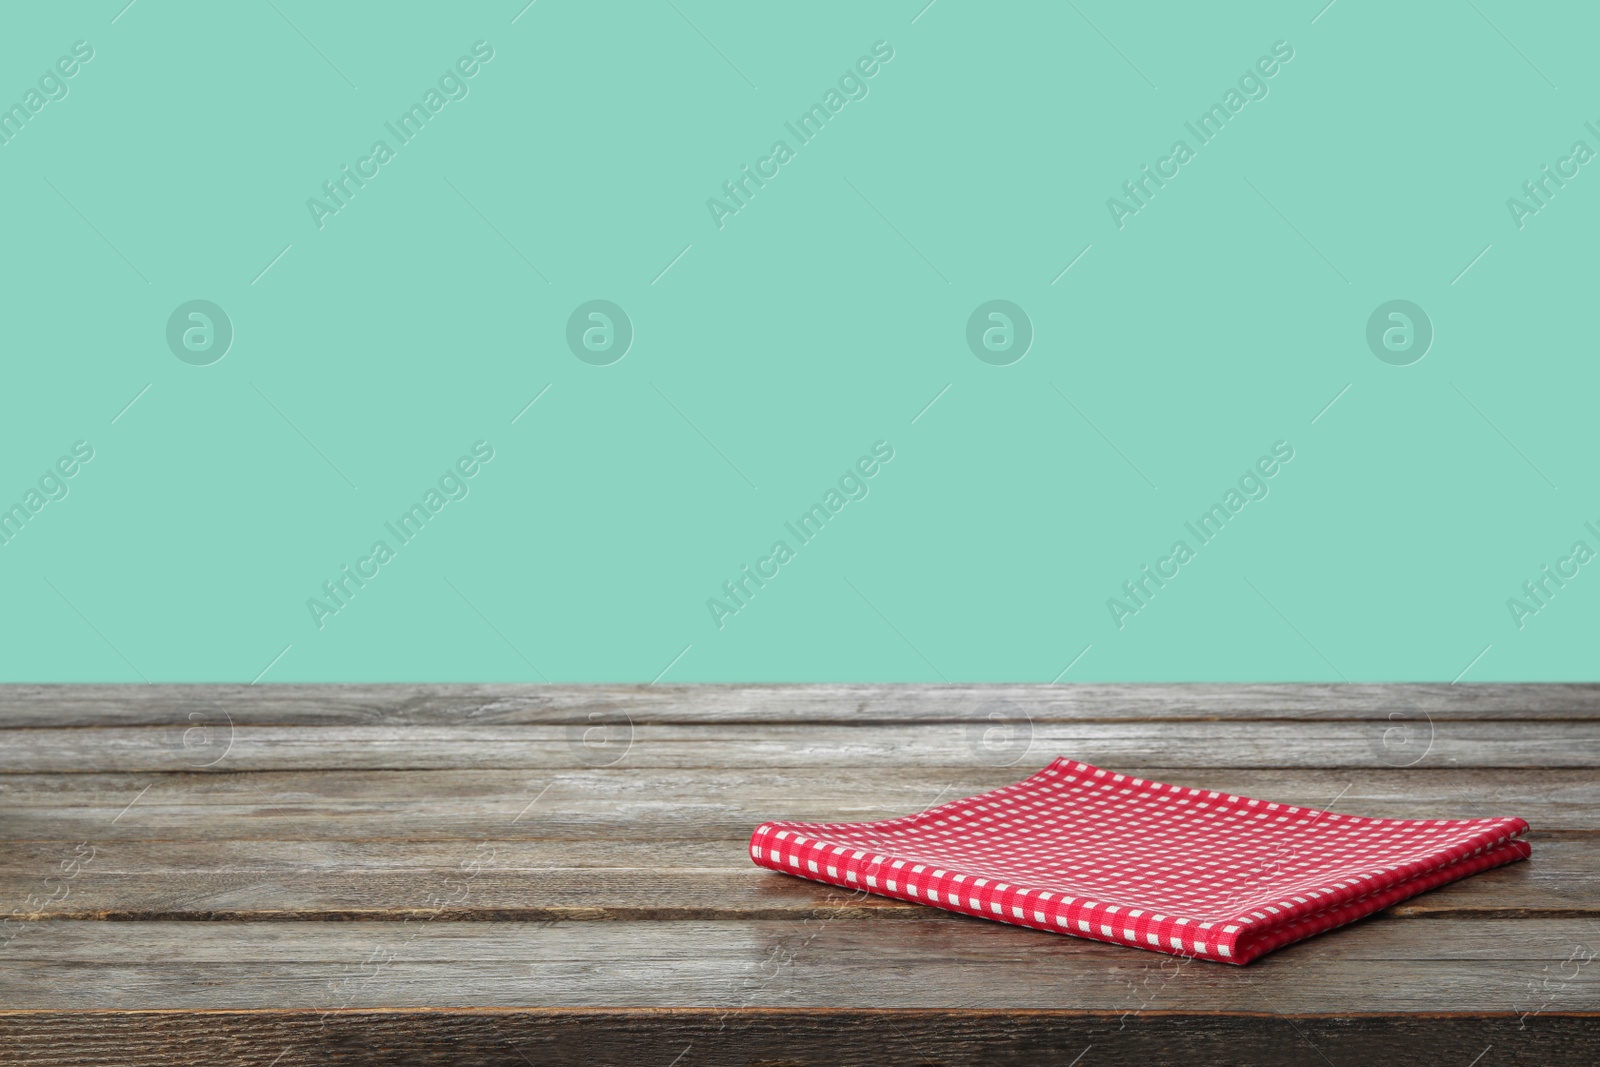 Image of Folded kitchen towel on wooden table against mint background. Space for design